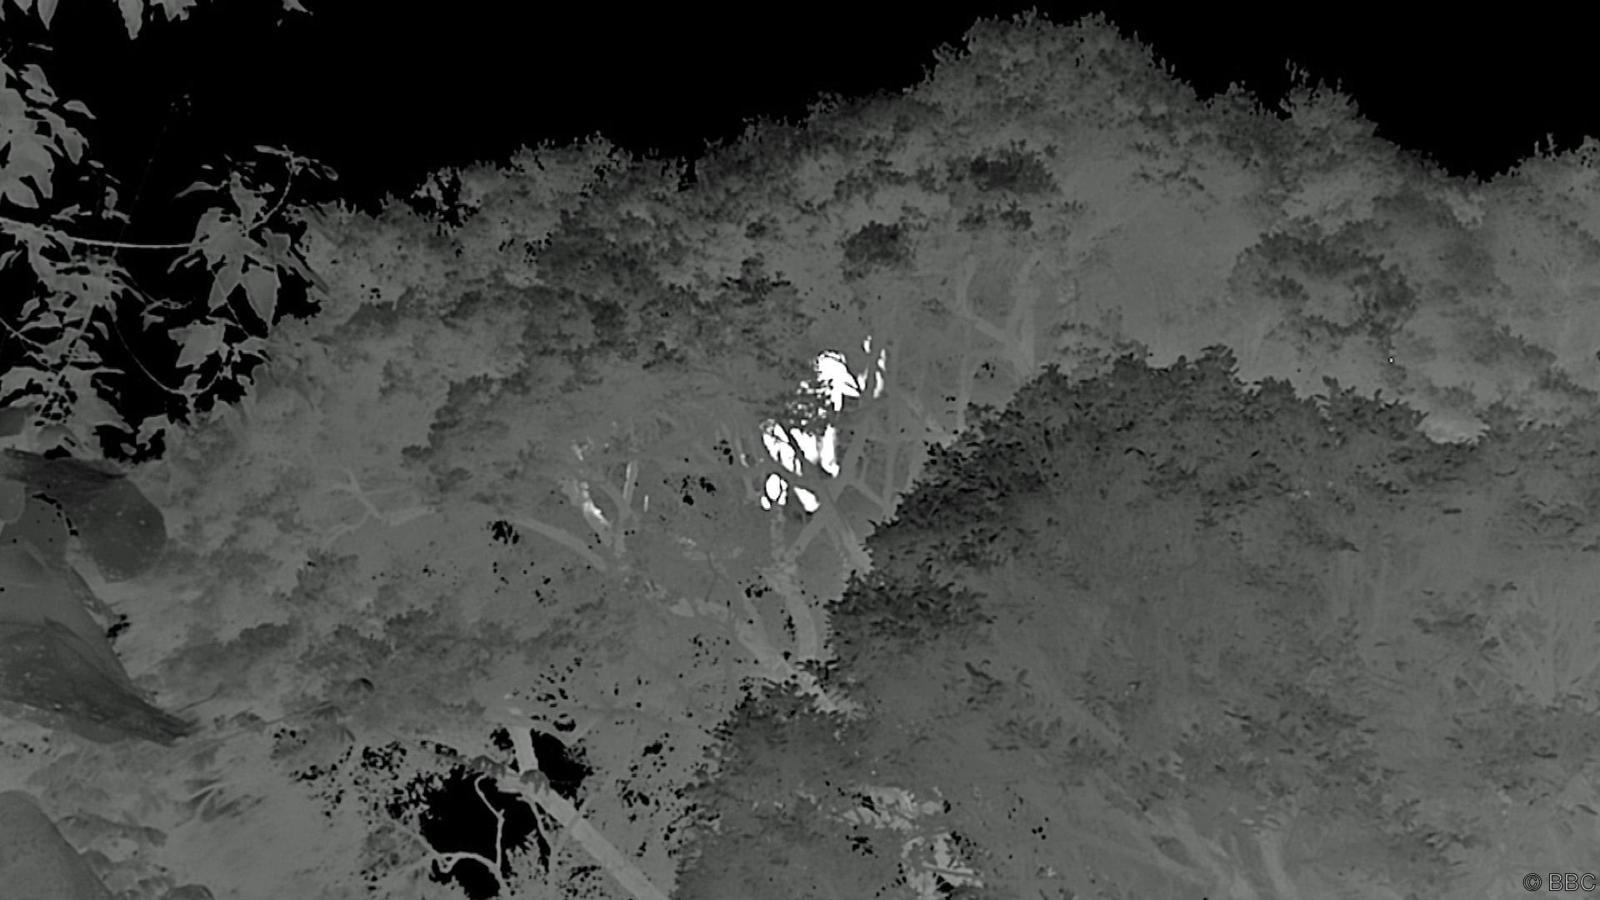 Eastern lowland gorillas have now been filmed on thermal cam at night building nests to sleep in up to 45 meters above ground.